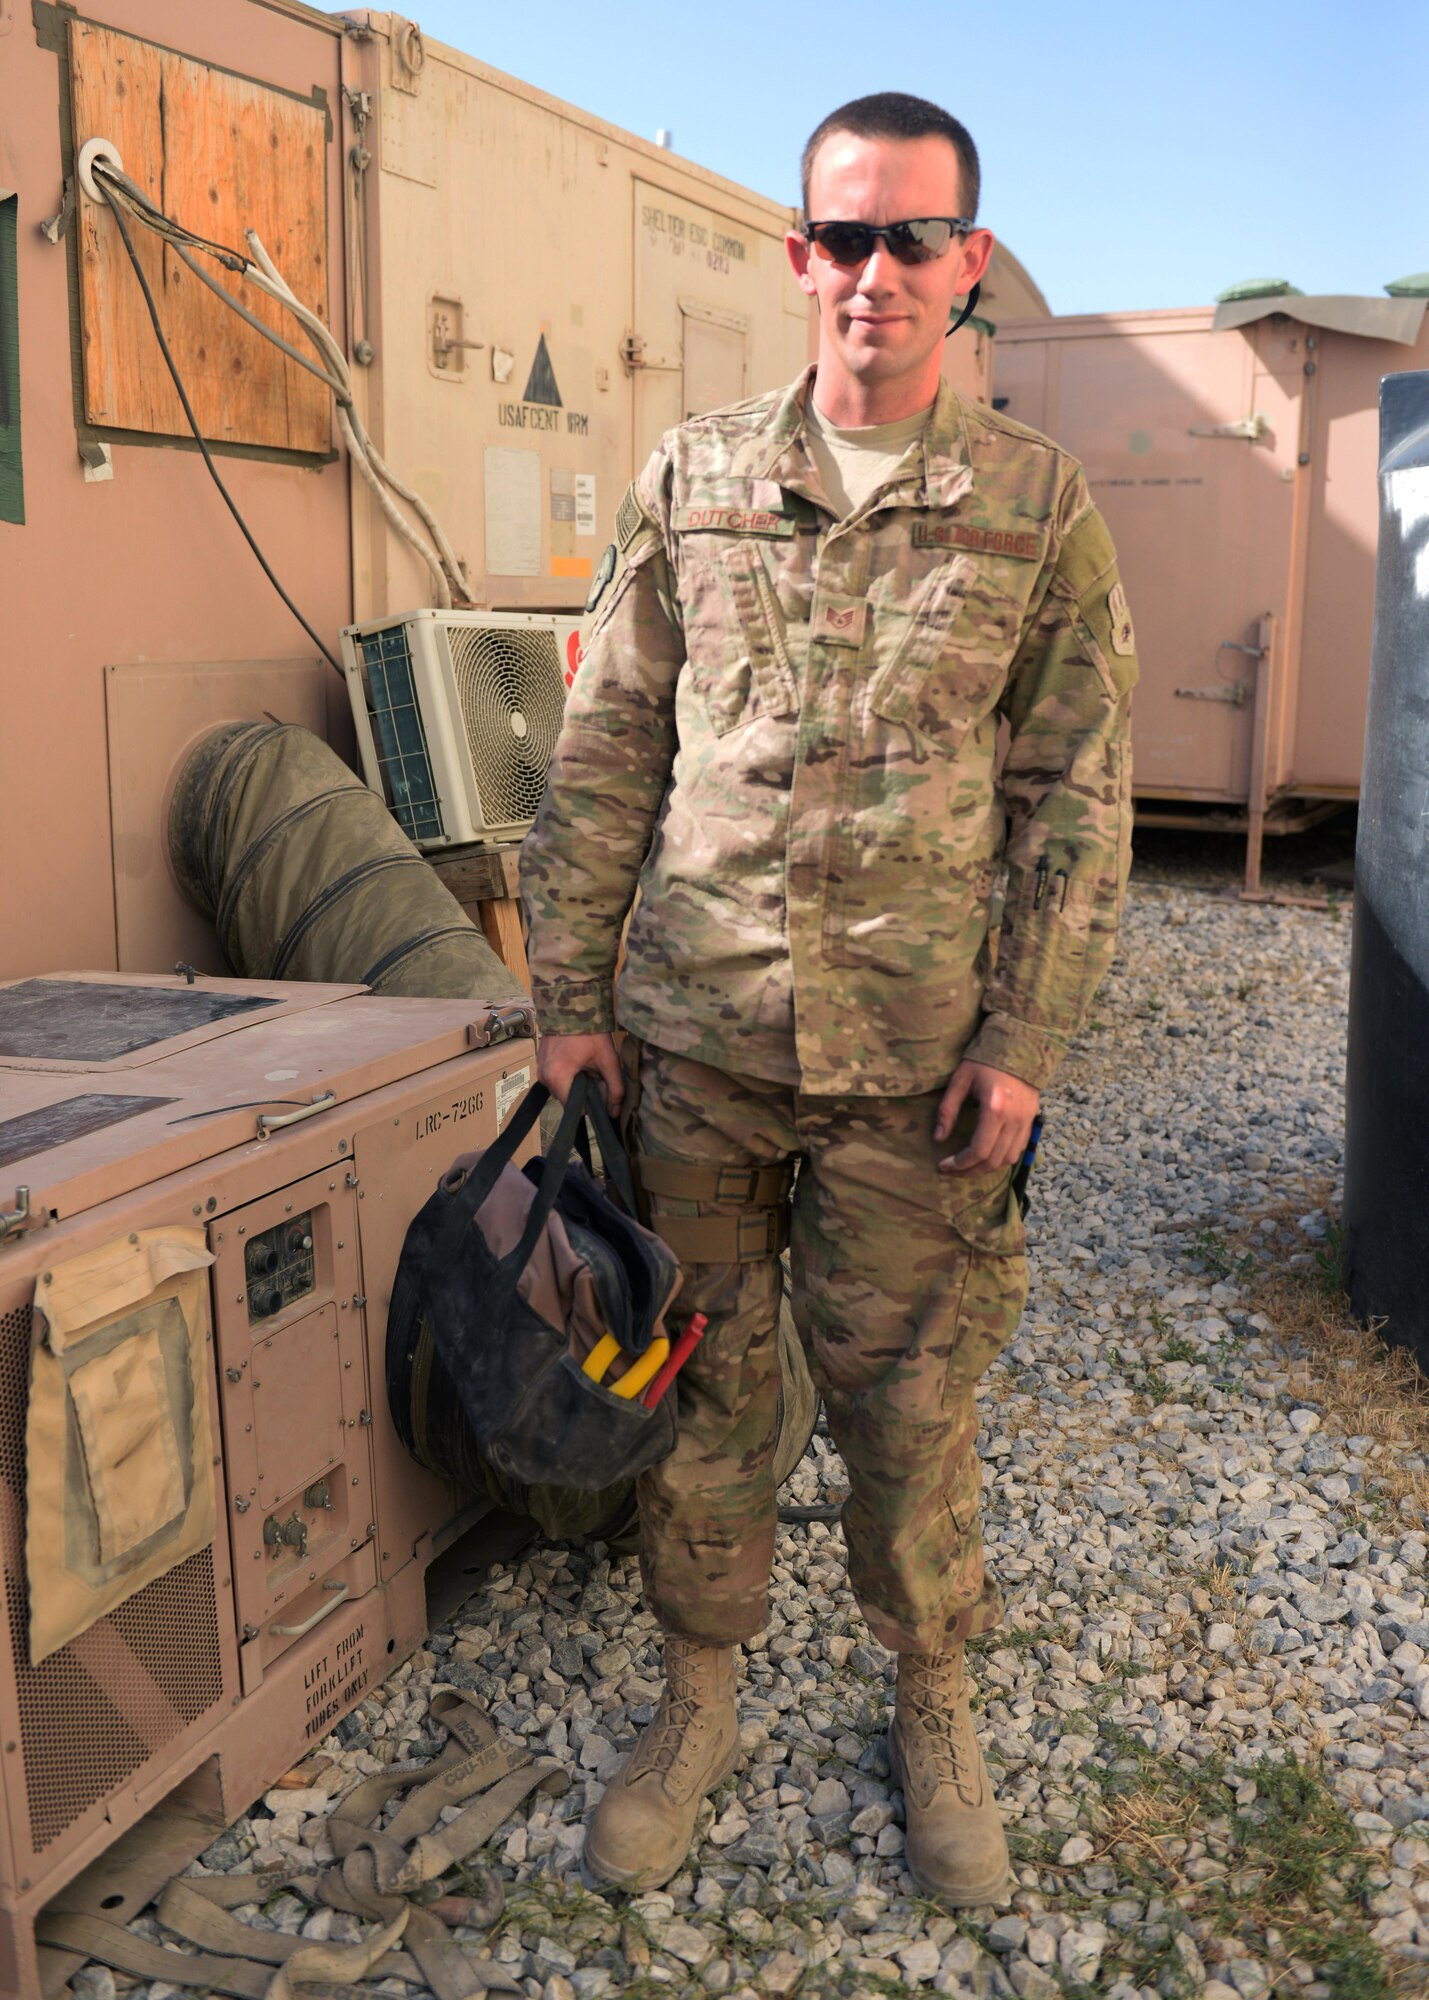 U.S. Air Force Staff Sgt. Russell Dutcher, 455th Expeditionary Civil Engineer Squadron, HVAC technician, poses for a photo after completing a work order June 30, 2015, at Bagram Airfield, Afghanistan. Dutcher who is part of the 1000s of Hands Project, is responsible for responding to all work orders dealing with AC problems as well as keeping Bagram’s mission equipment such as computers and servers cool. (U.S. Air Force photo by Senior Airman Cierra Presentado/Released)